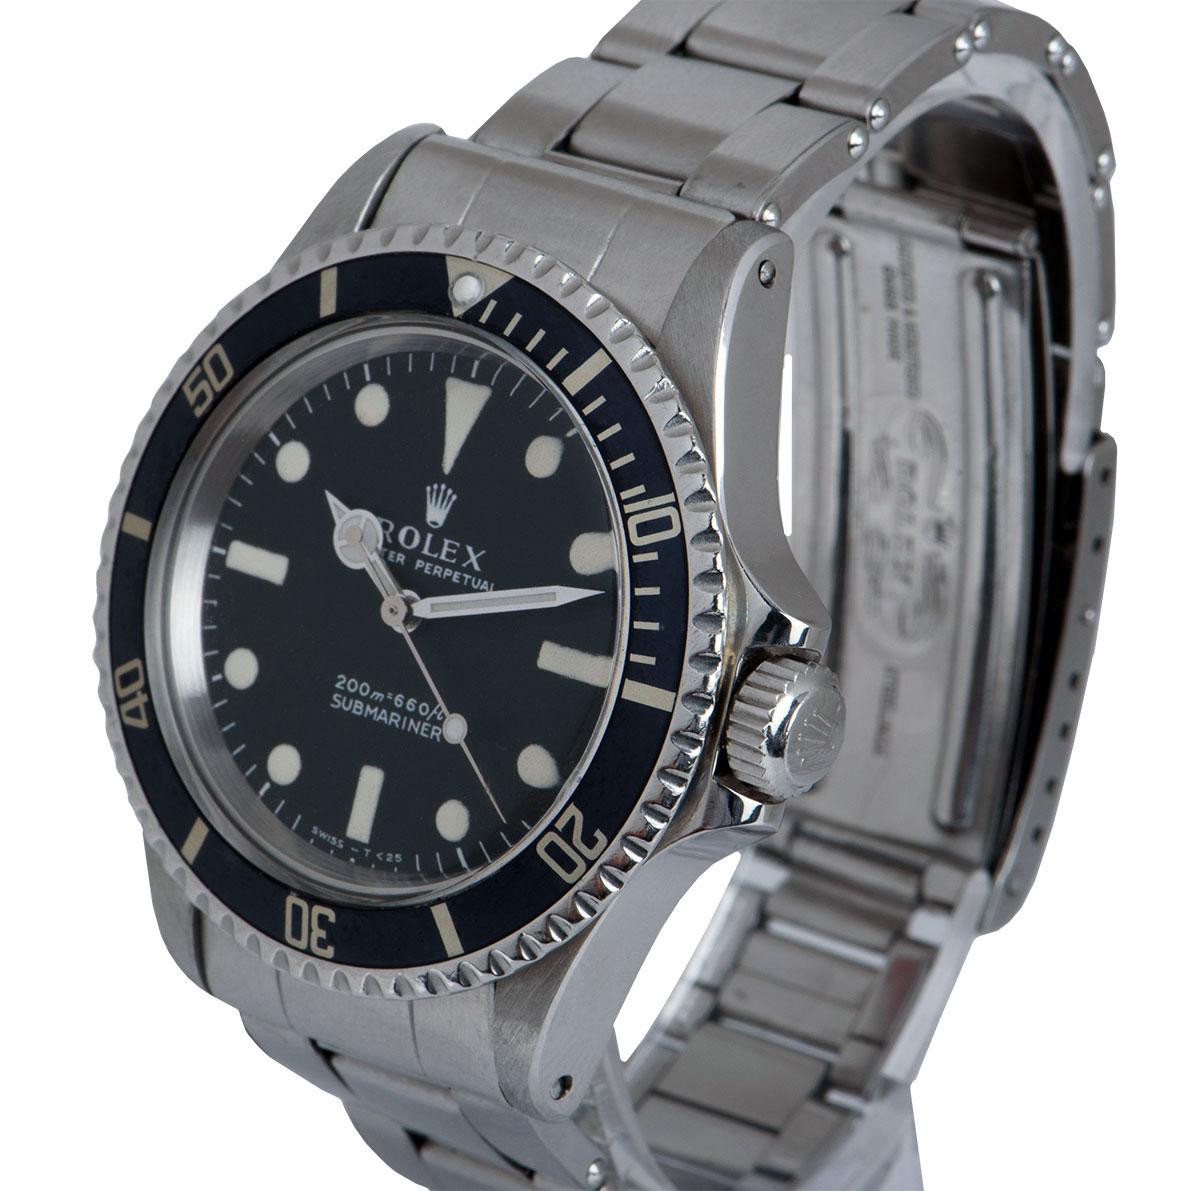 A 40 mm Stainless Steel Oyster Perpetual Submariner Non-Date Vintage Gents Wristwatch, matte black dial with hour markers, a stainless steel bi-directional rotating bezel with a black bezel insert, a stainless steel oyster bracelet with a stainless